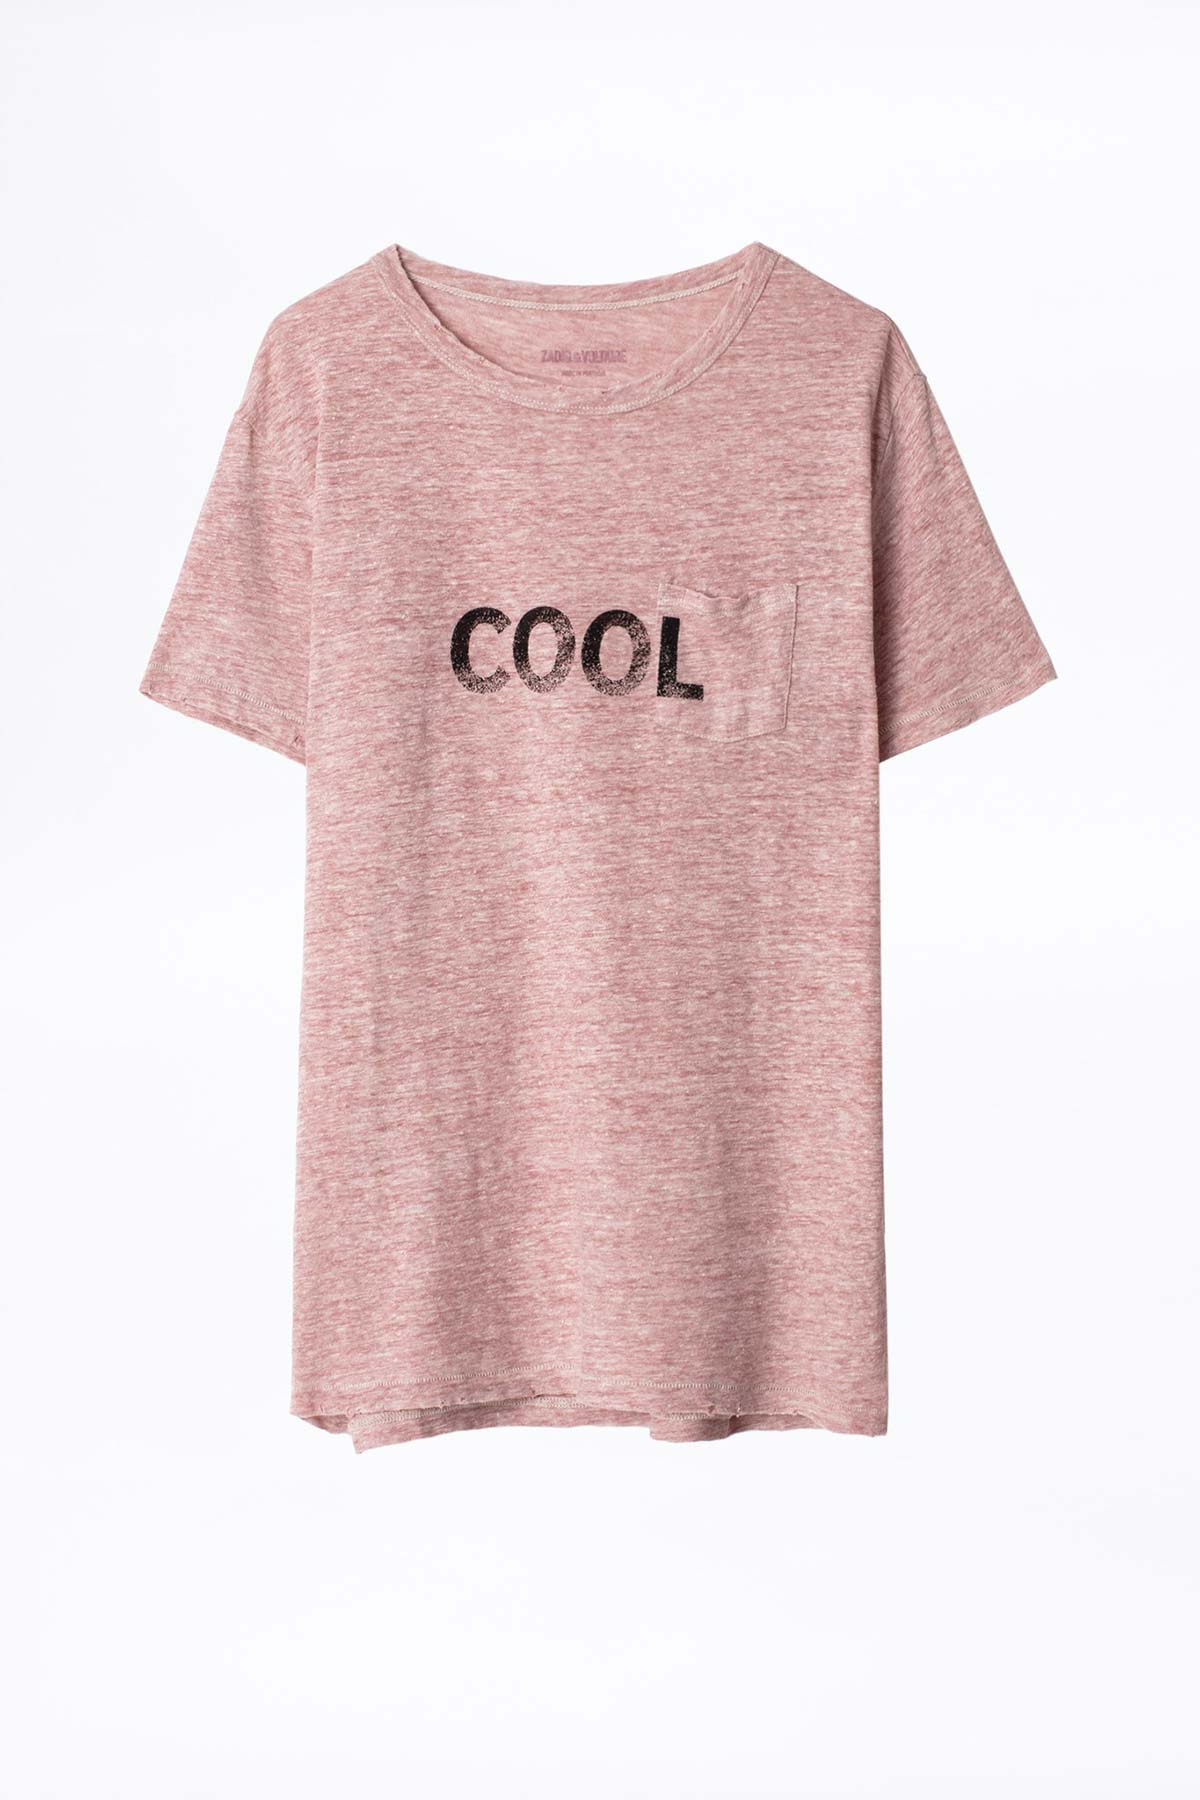 Zadig & Voltaire Cool T-shirt-Libas Trendy Fashion Store